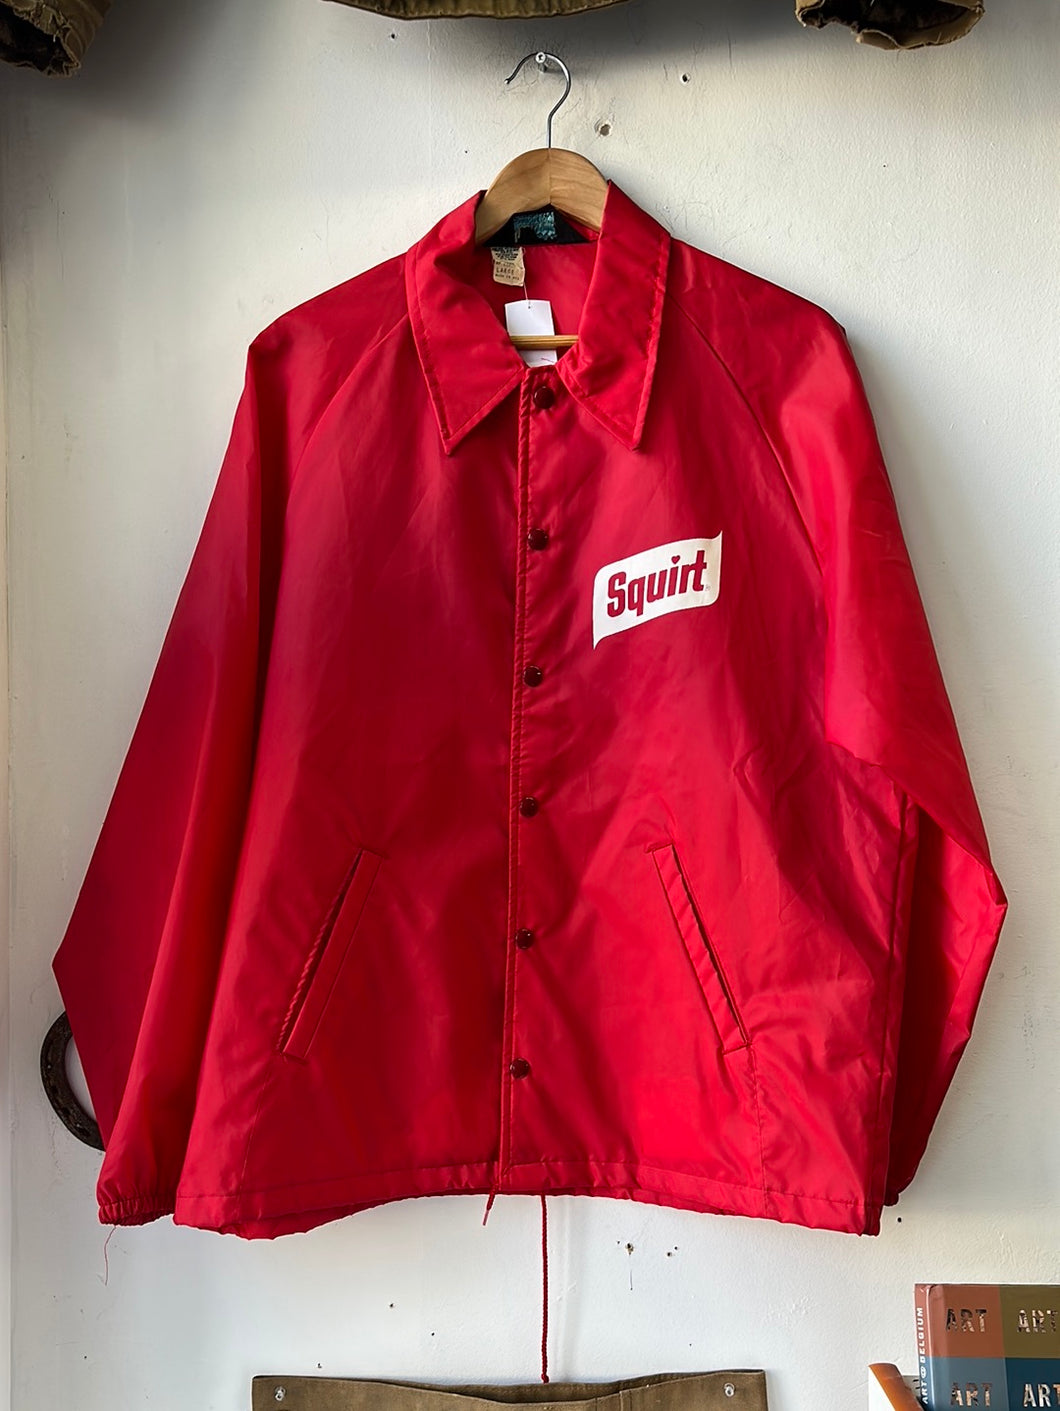 1960s/'70s Champion Squirt Coaches Jacket